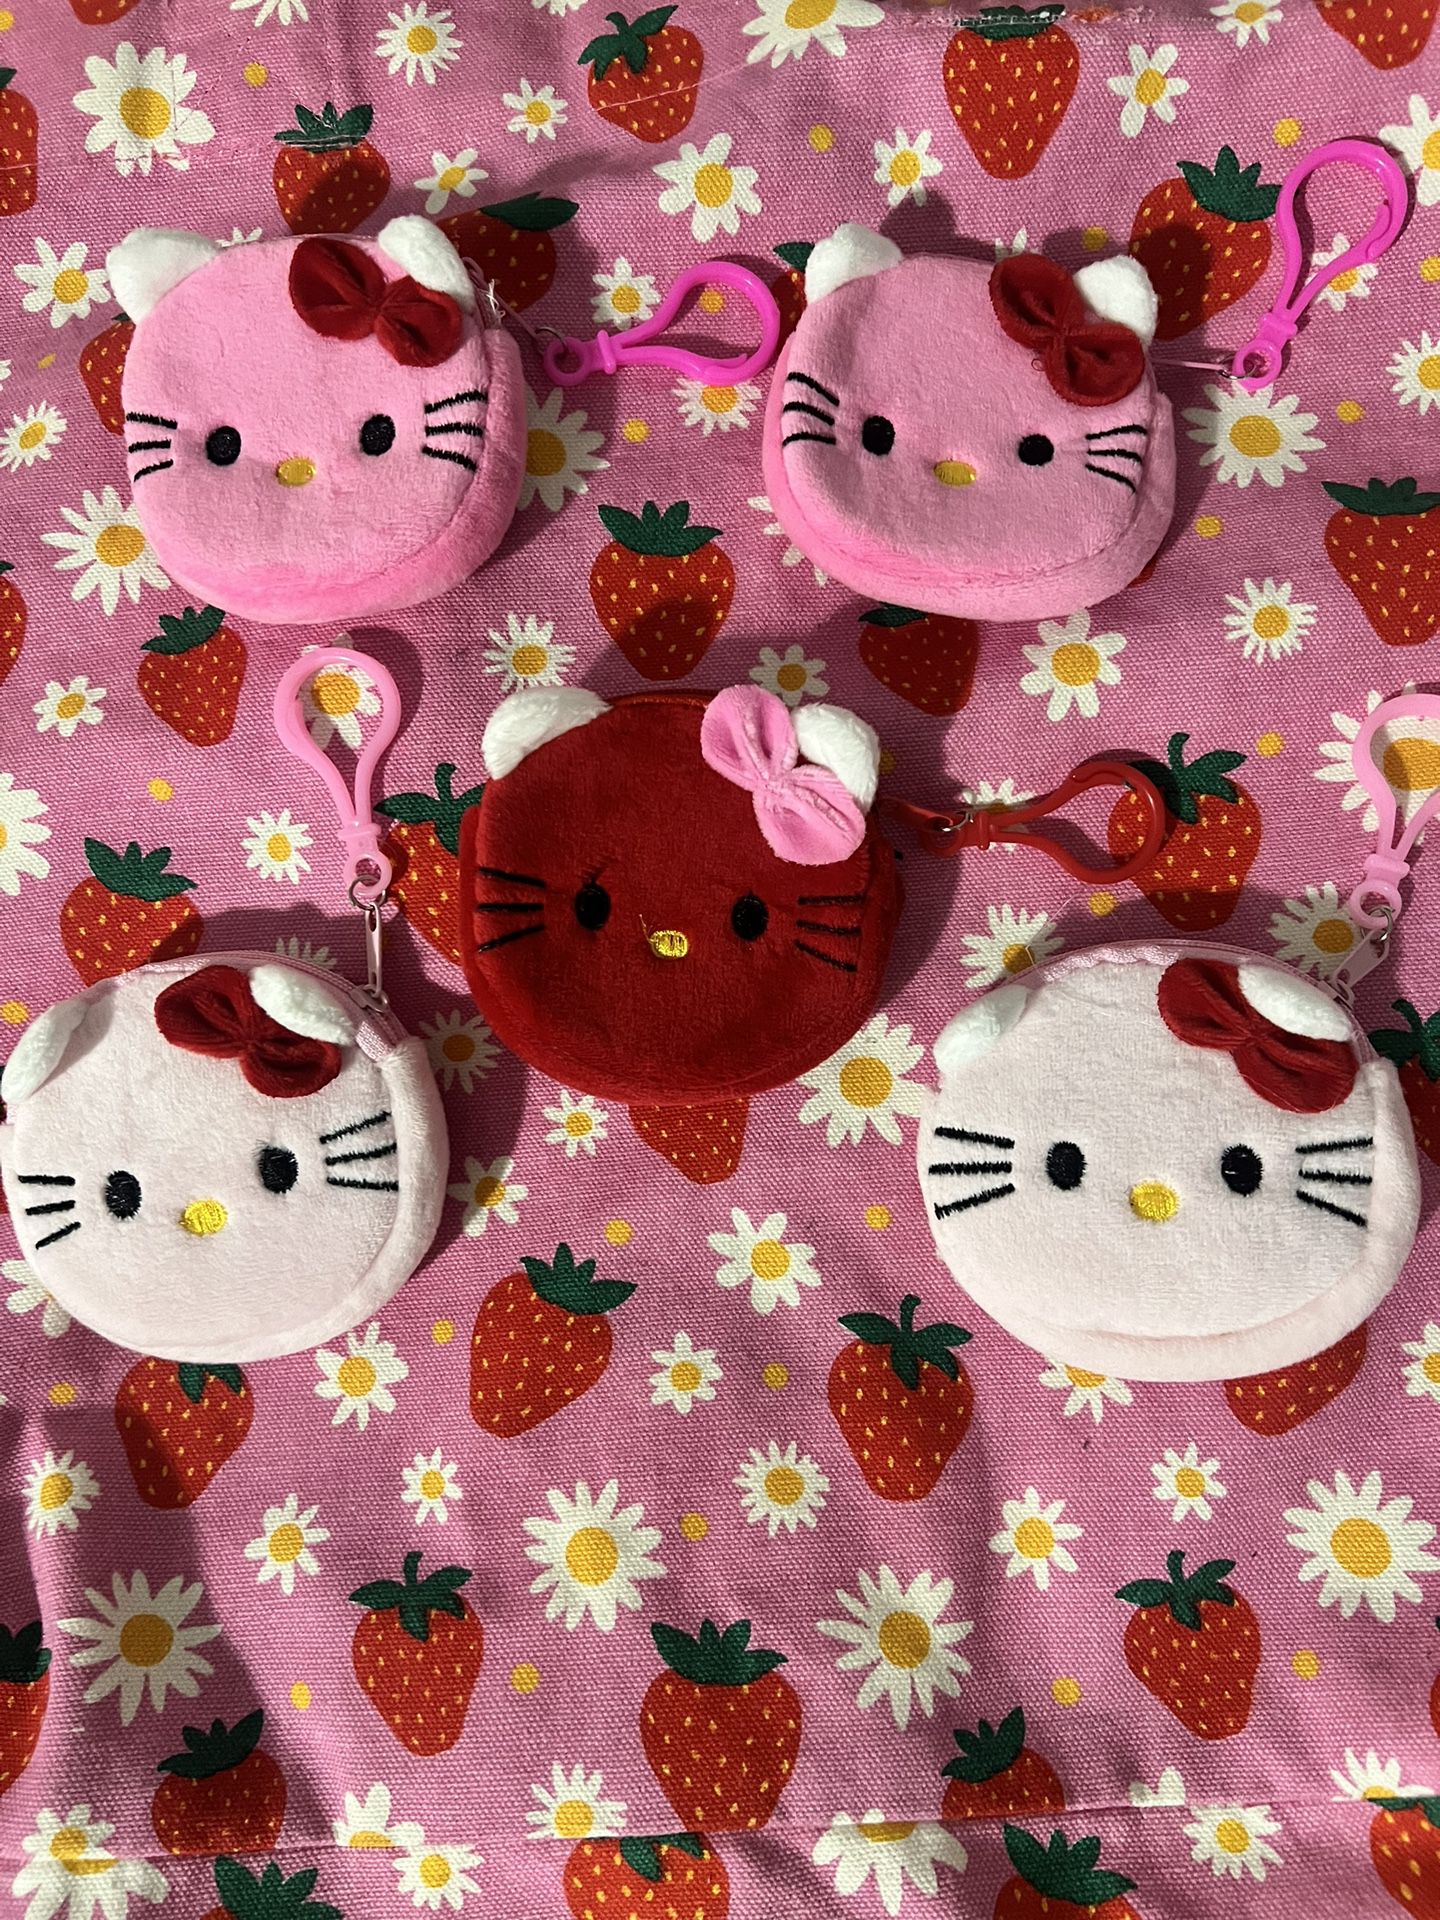 Hello Kitty Soft Coin Purse With Clip 